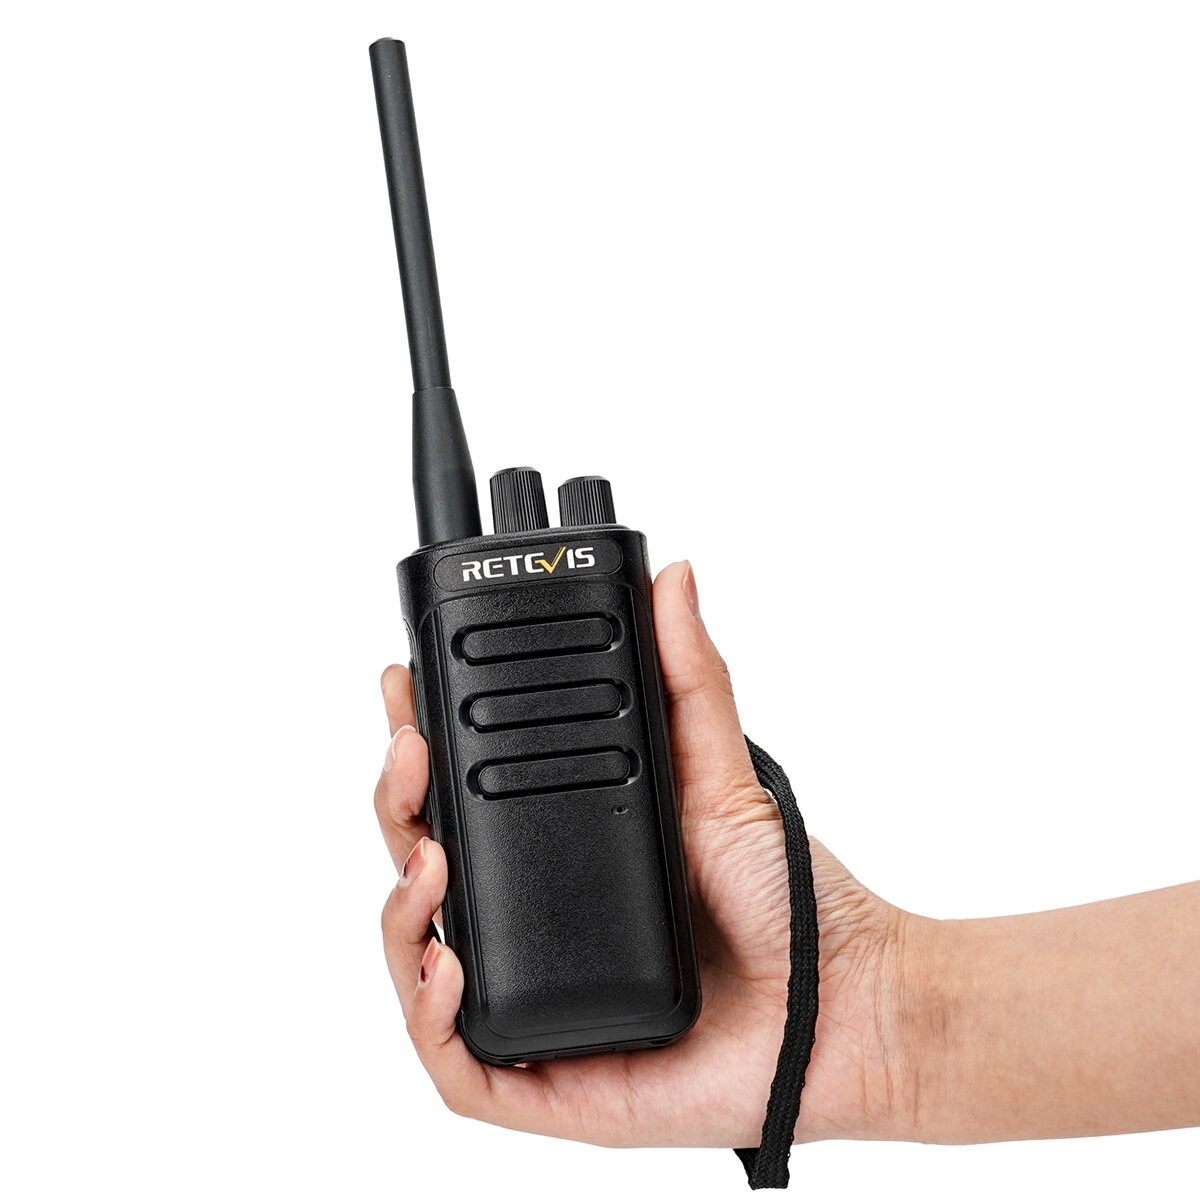 Retevis RB85 400-470MHz 10W Walkie Talkie USB Charger Electronic Noise Reduction Two Way Radio Handheld